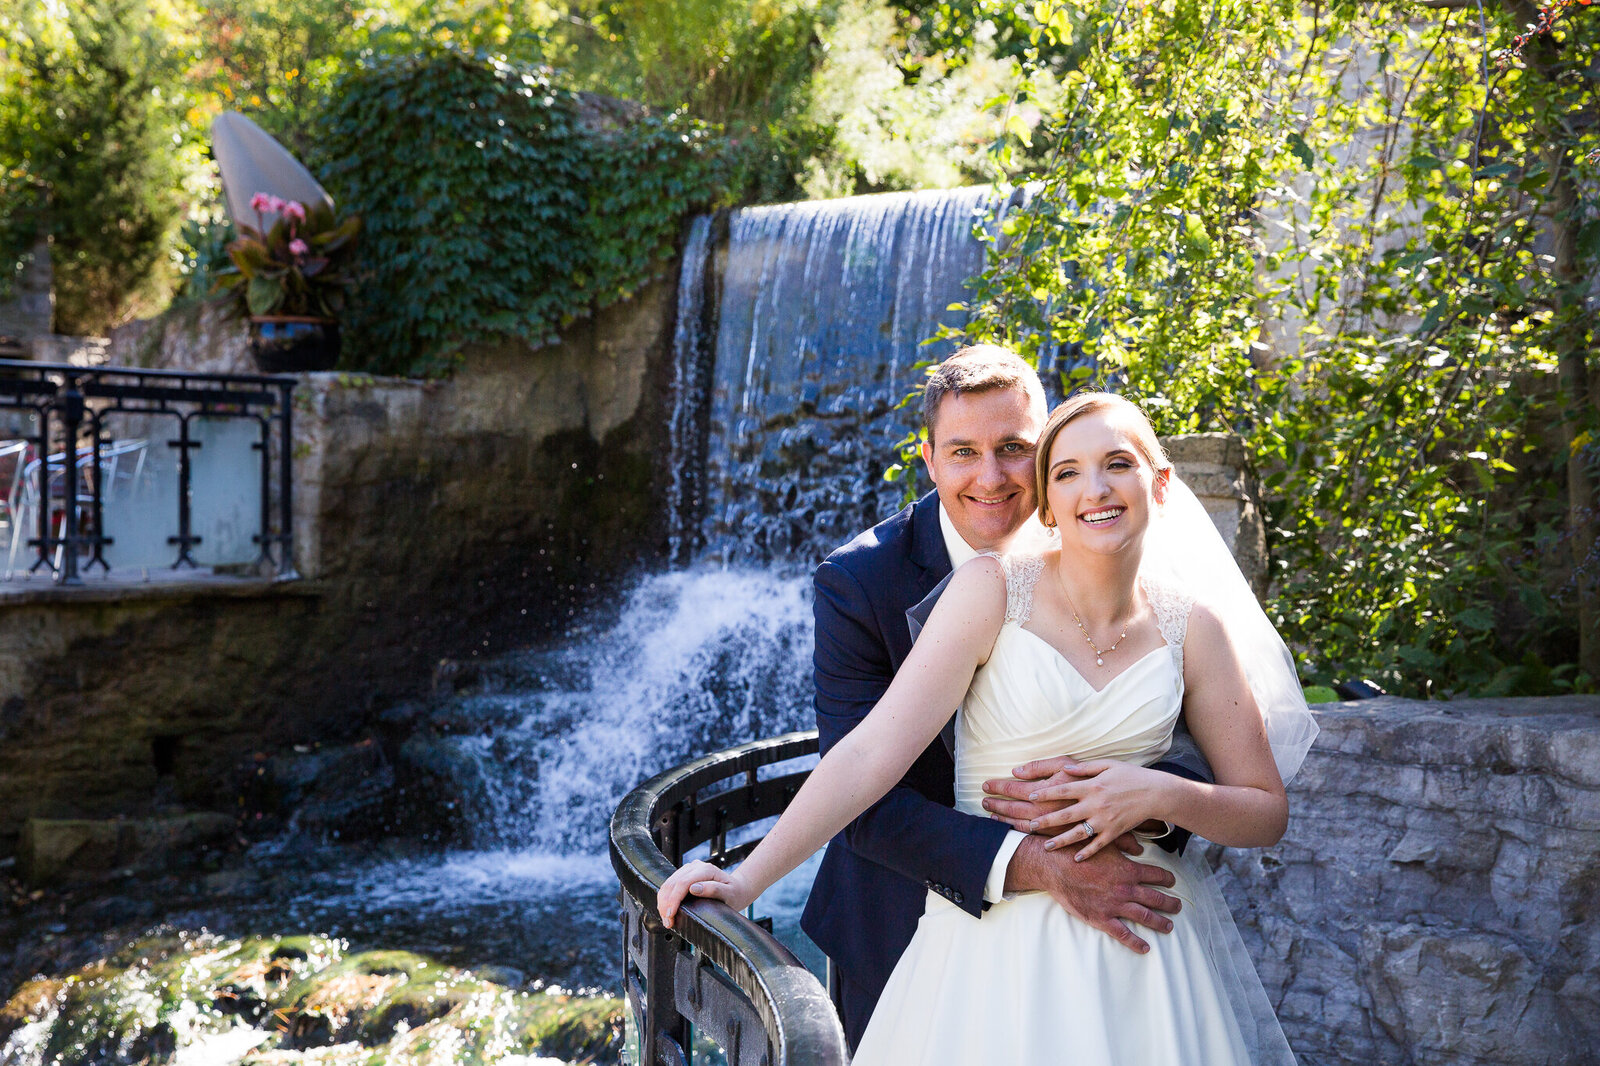 Bride and groom in front of waterfall at Ancaster Mill wedding.